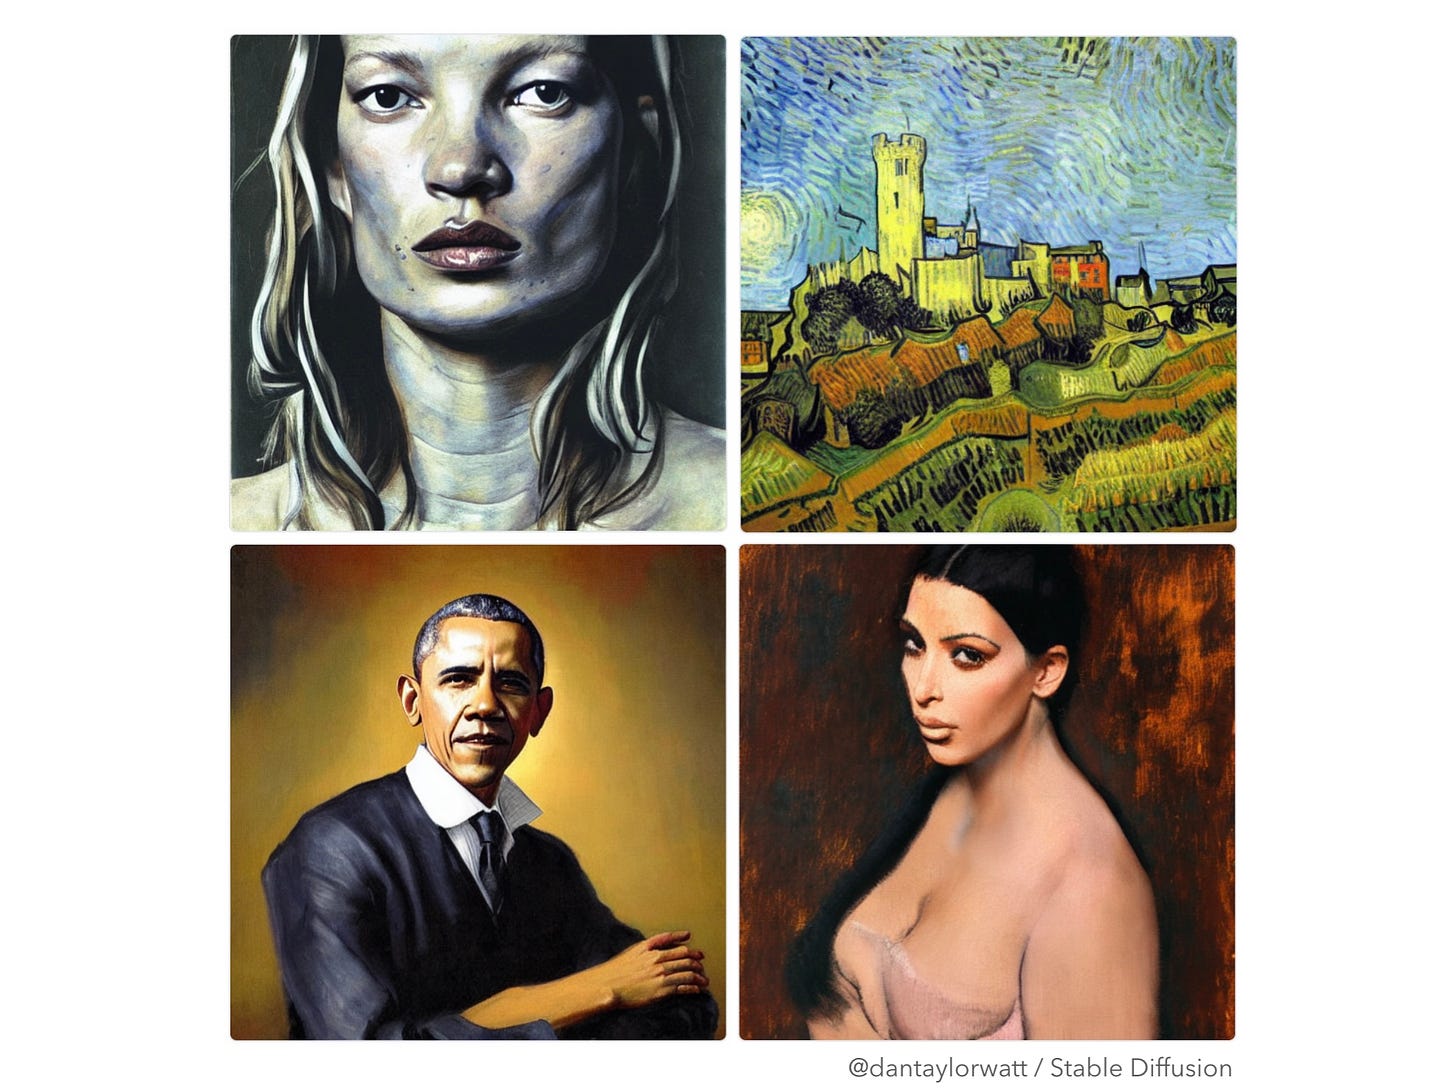 Images created by Stable Diffusion using prompts ‘Kate Moss painted by Lucien Freud’, ‘Lewes Castle painted by Van Gogh’, ‘Barack Obama painted by Rembrandt’, ‘Kim Kardashian painted by Degas’